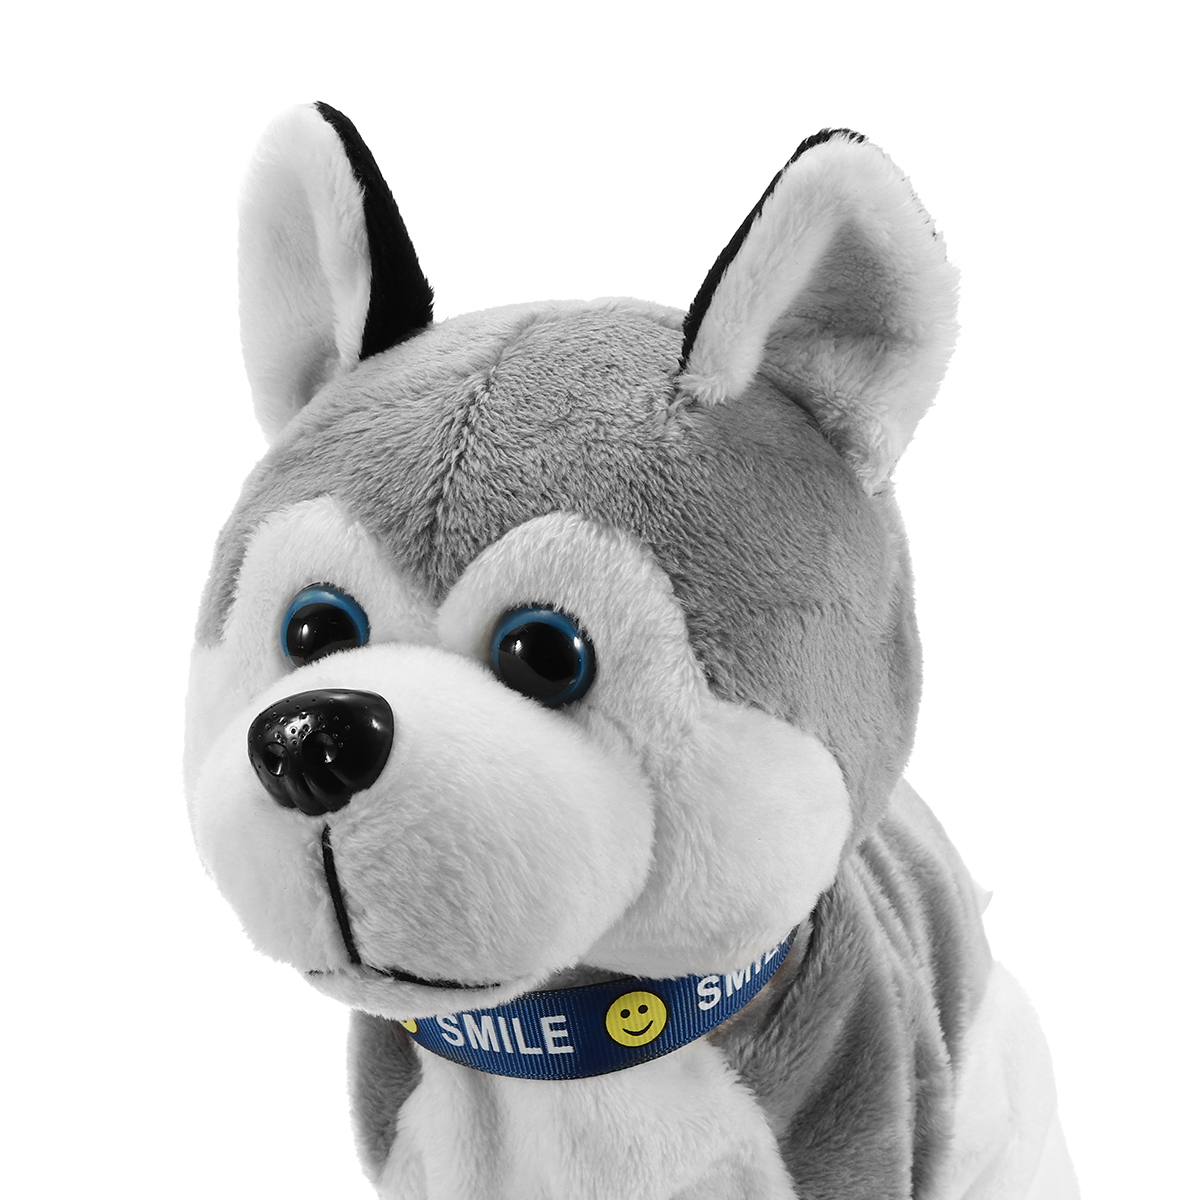 Interactive-Dog-Electronic-Pet-Stuffed-Plush-Toy-Control-Walk-Sound-Husky-Reacts-Touch-1414452-8